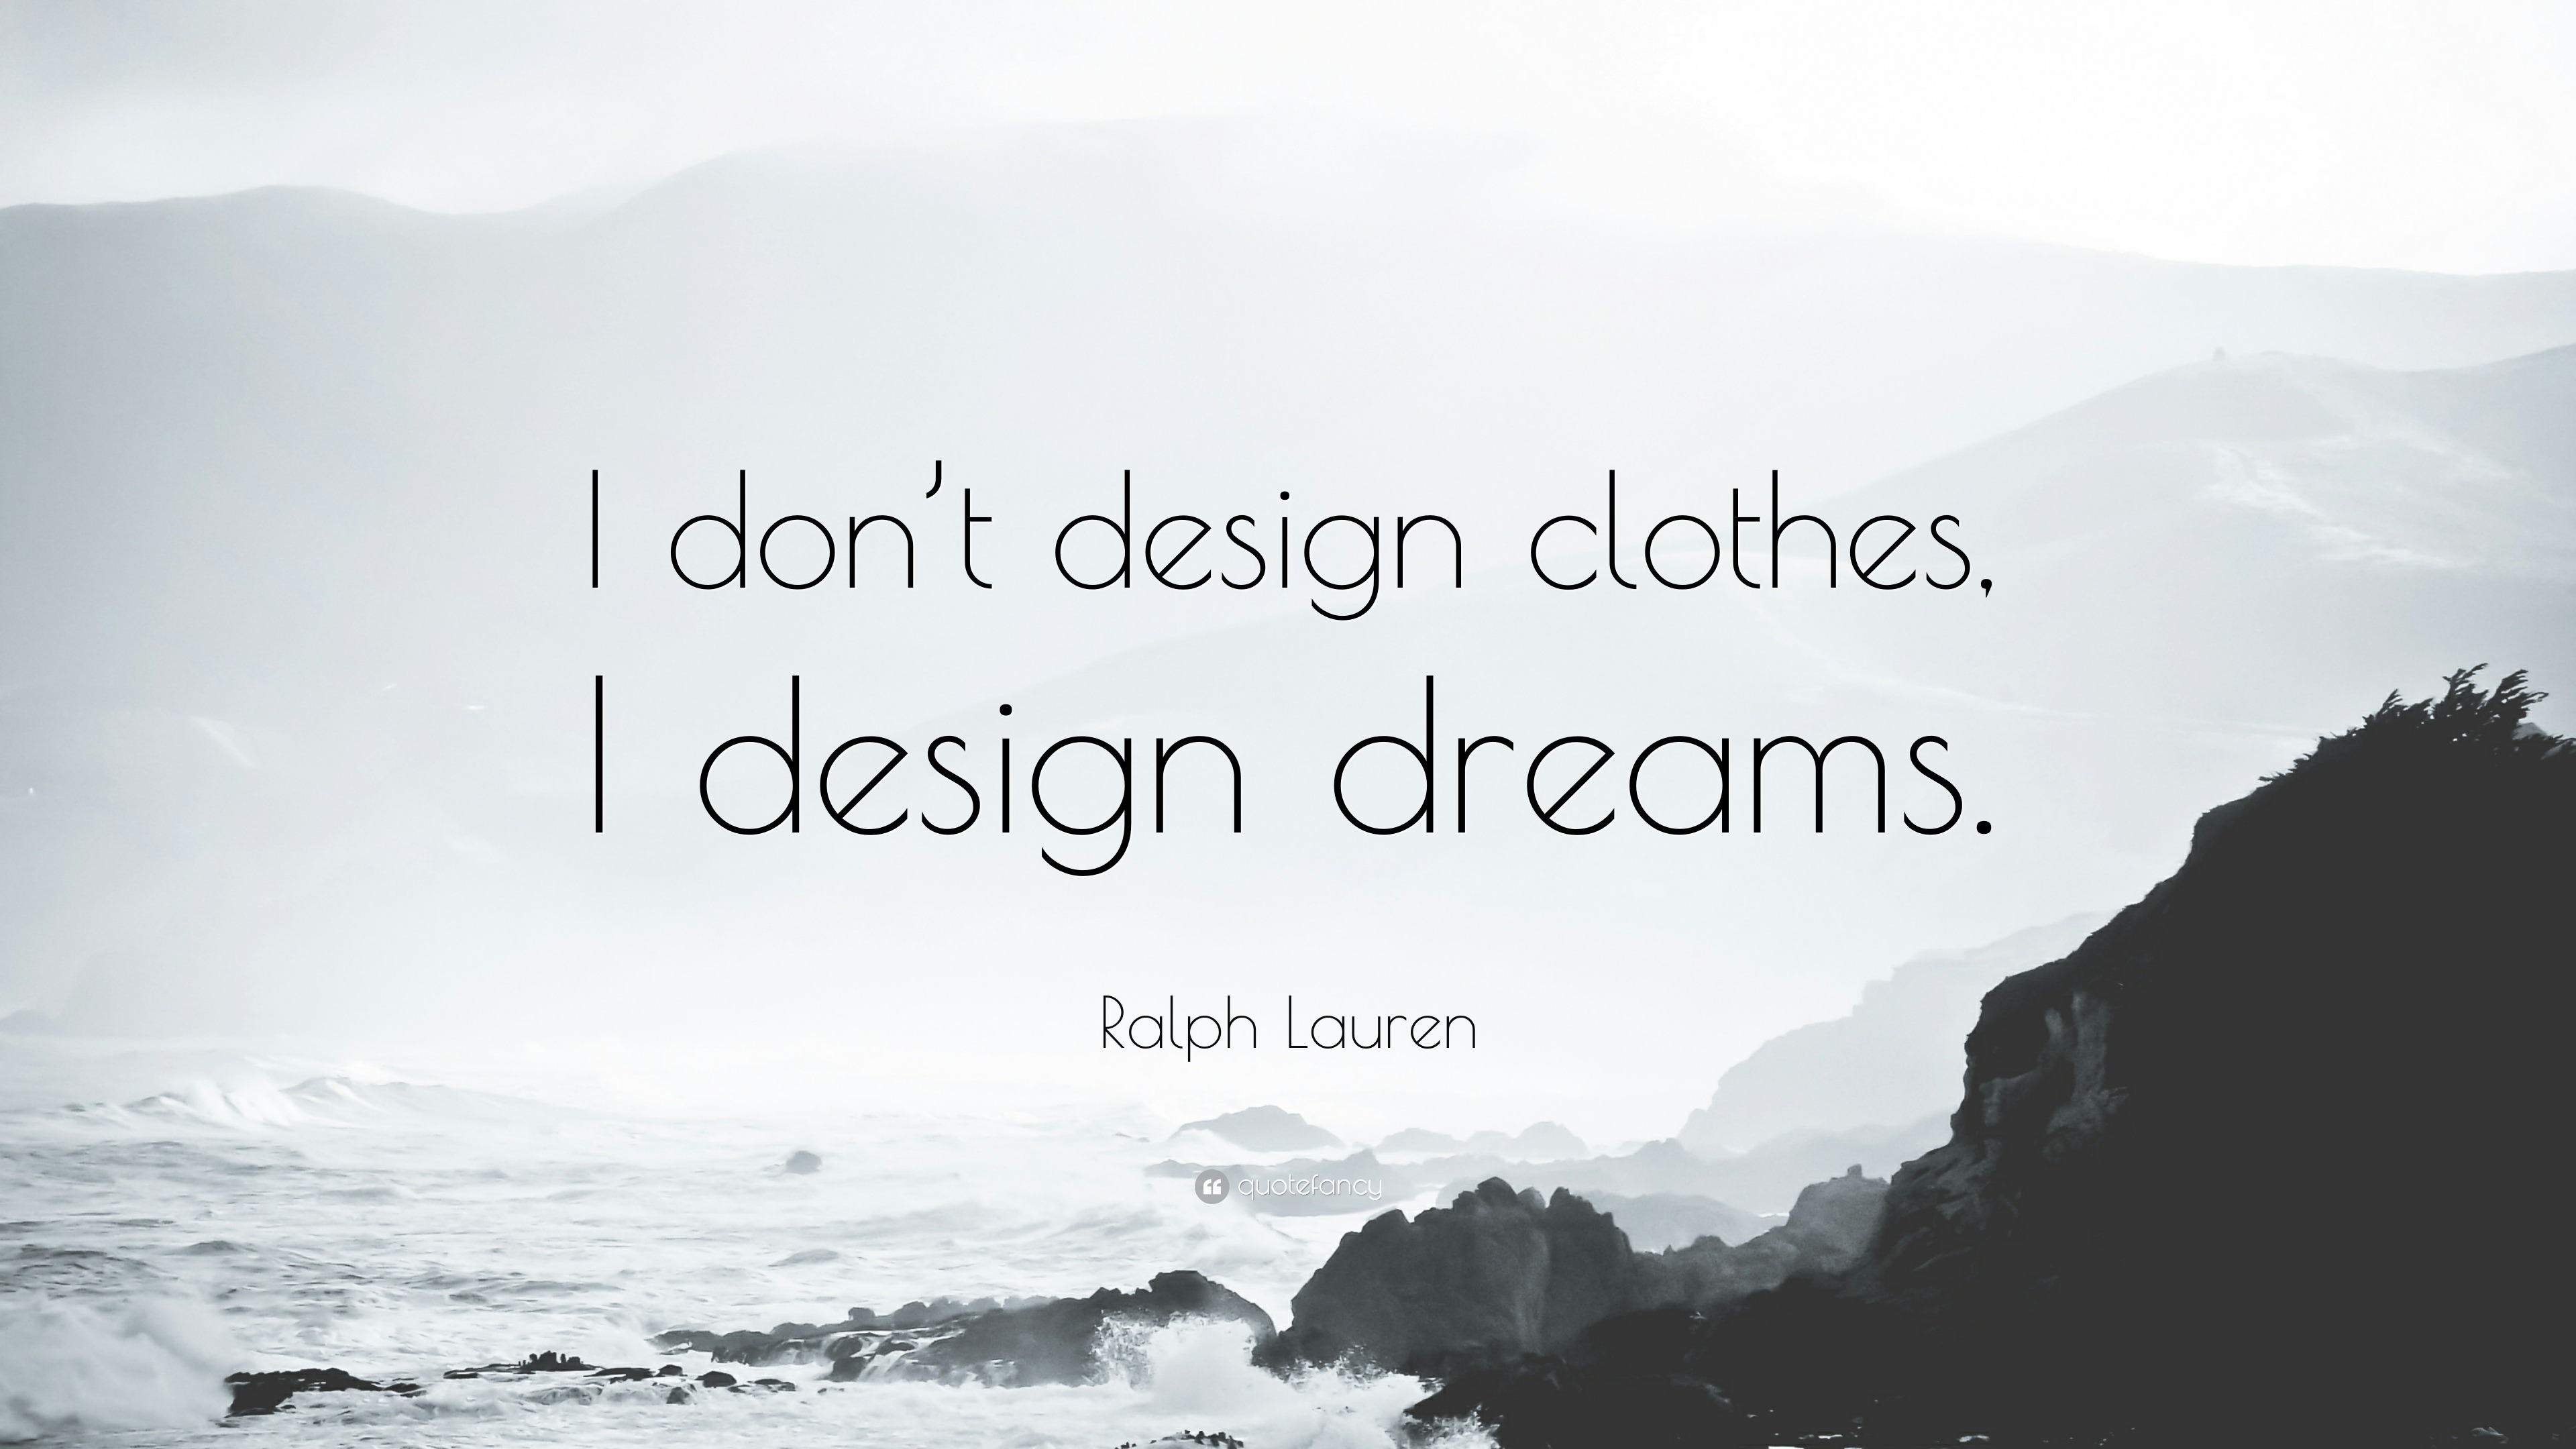 Fashion Quotes (40 wallpapers) - Quotefancy